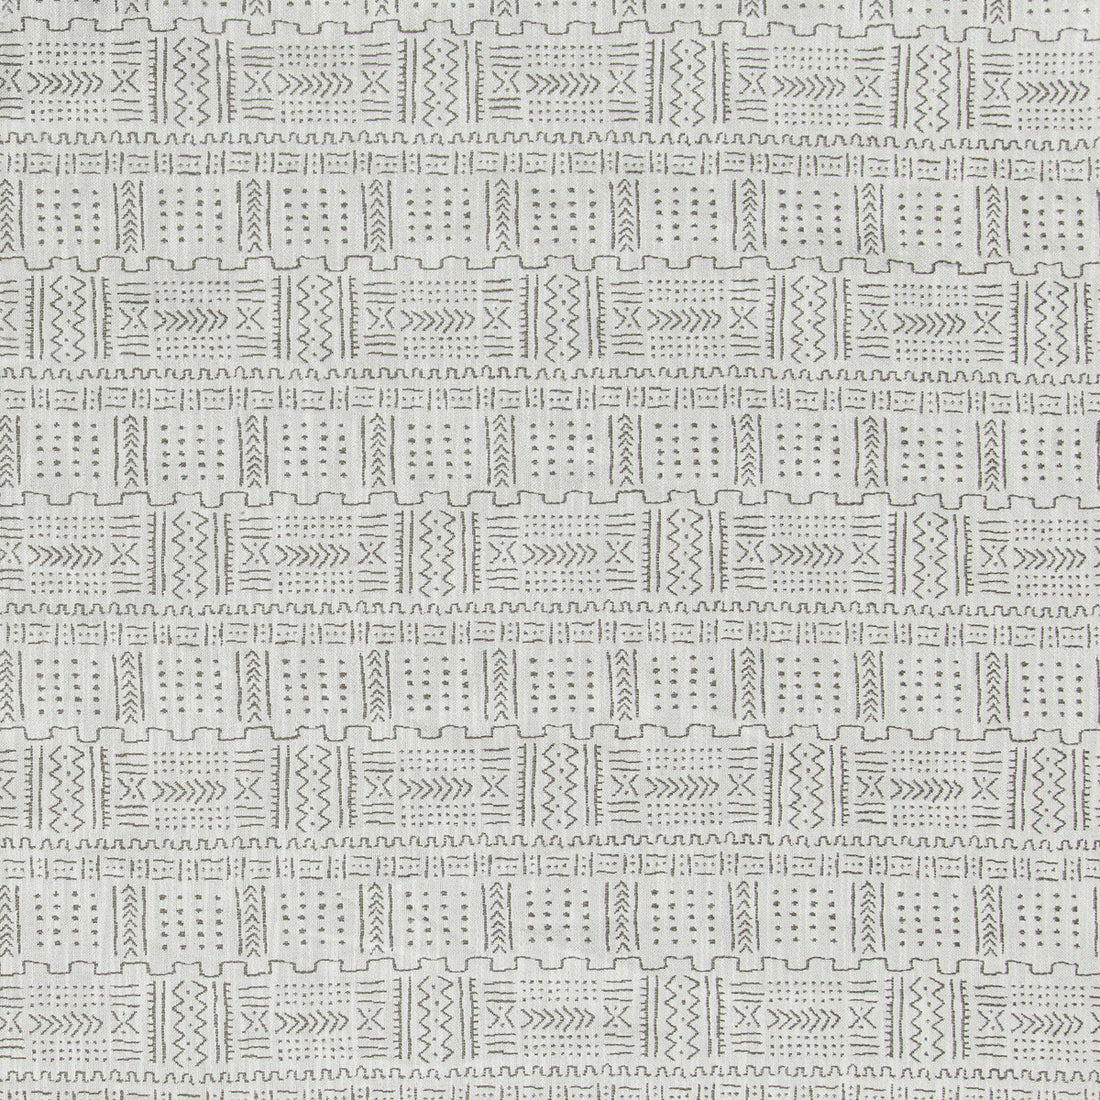 Amanzi fabric in dune color - pattern 35831.11.0 - by Kravet Design in the Indoor / Outdoor collection